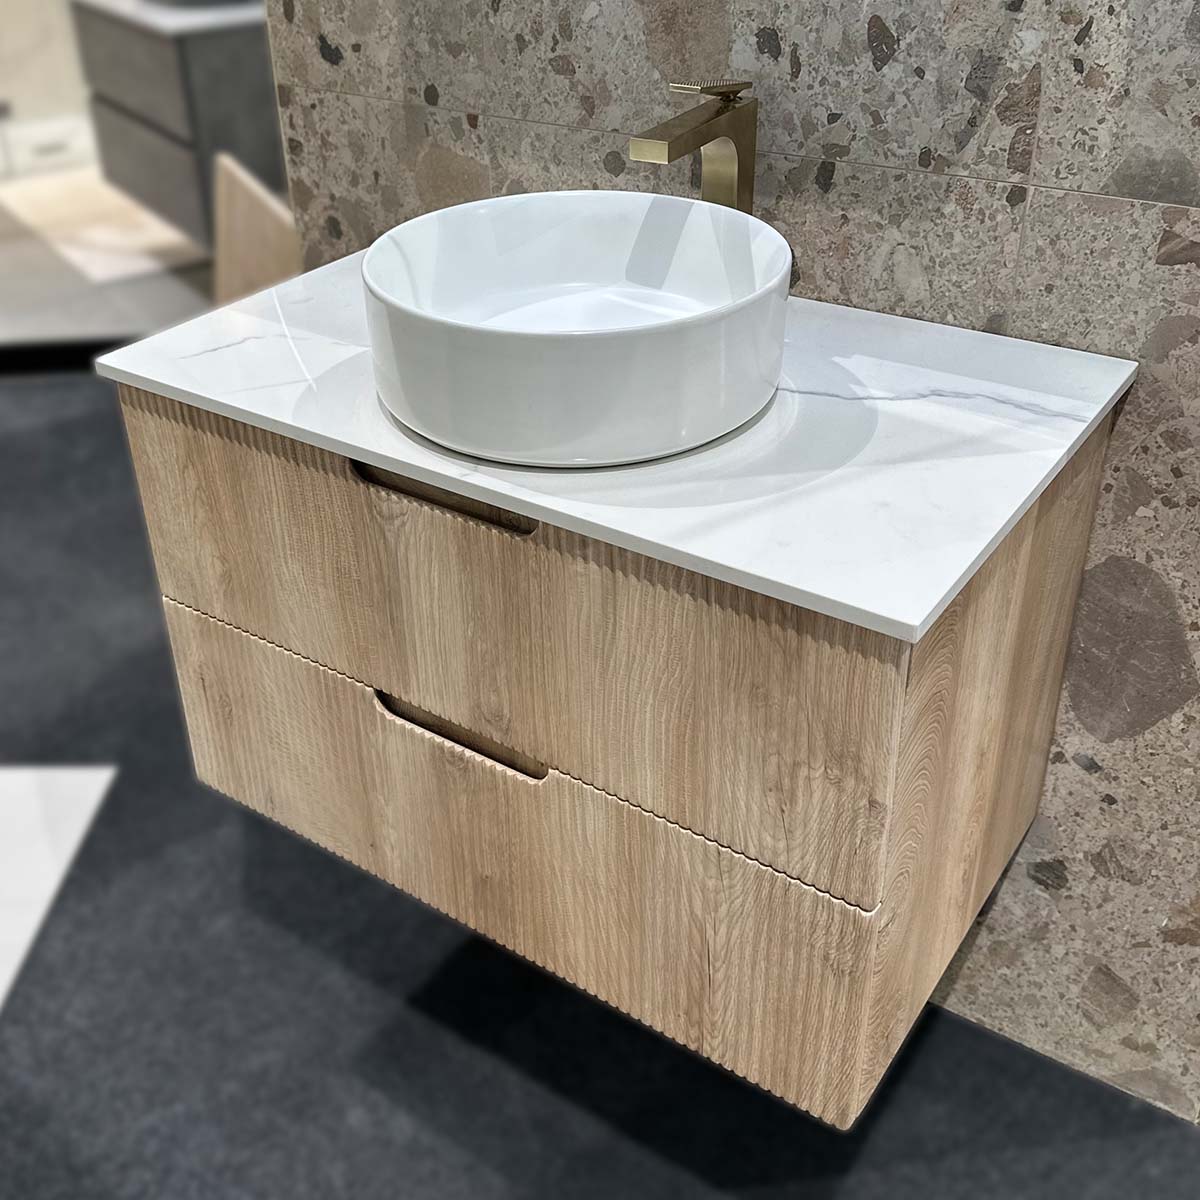 Granlusso Opus Oak Fluted Wall Mounted Vanity Unit With Marble Effect Worktop